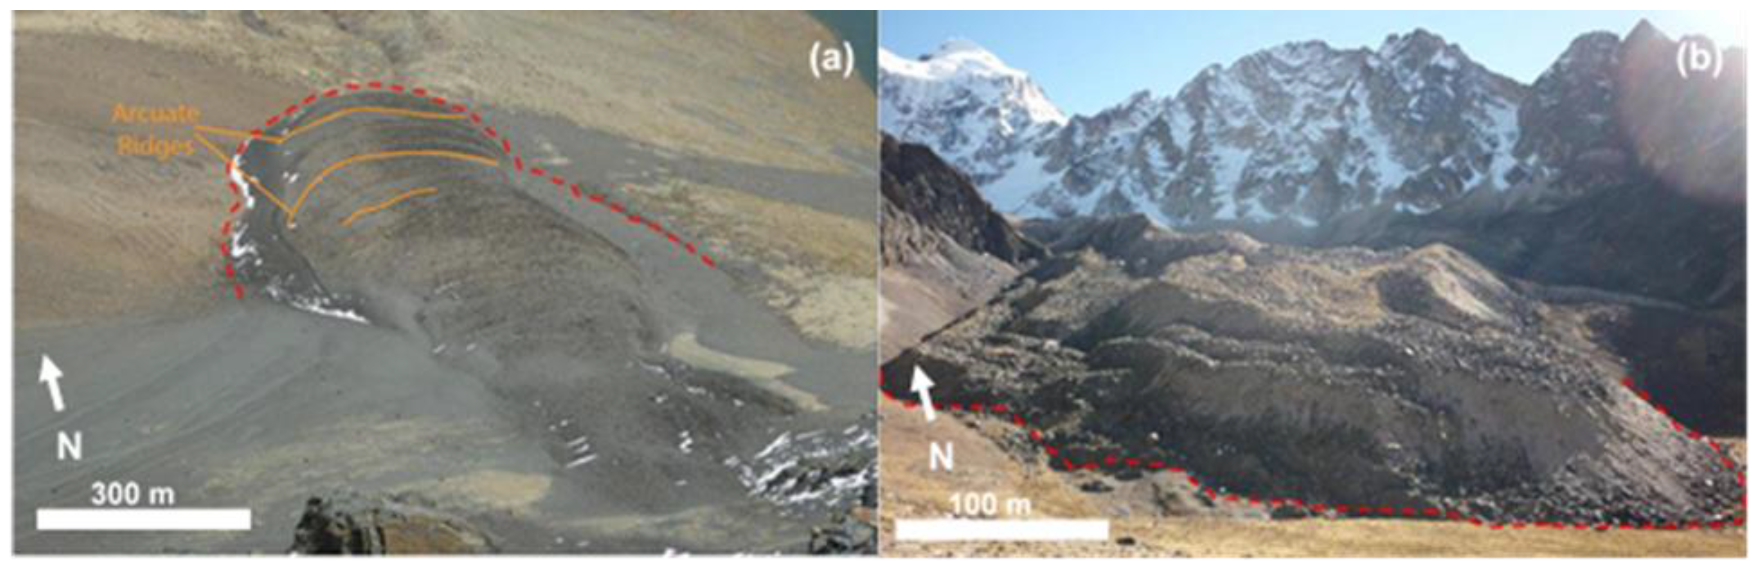 Remote Sensing | Free Full-Text | Numerical Analysis of Putative Rock  Glaciers on Mount Sharp, Gale Crater, Mars